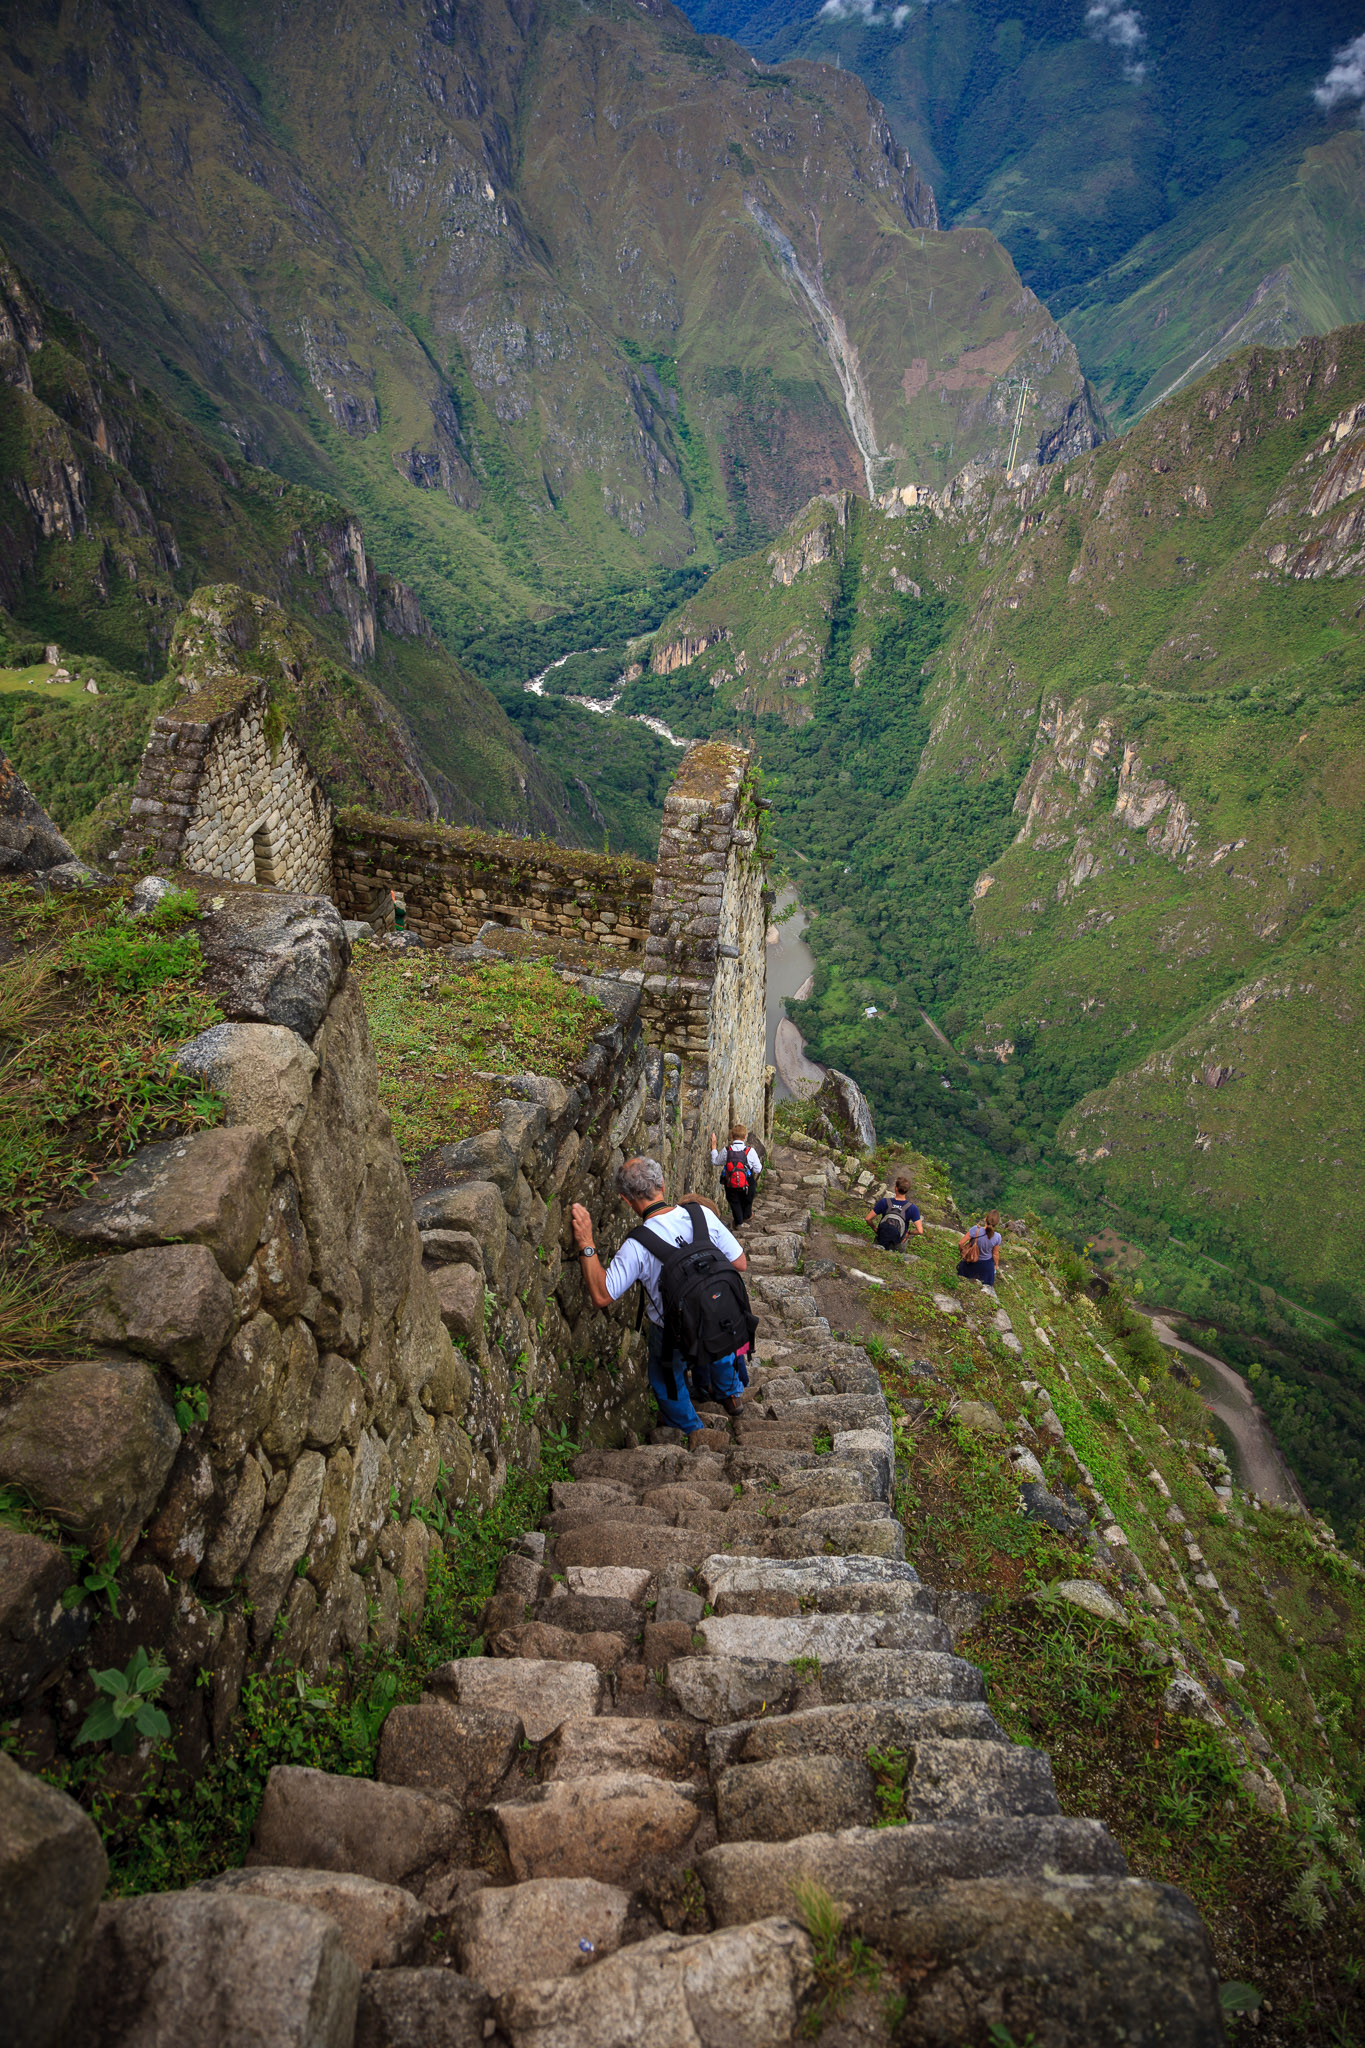 Now for the steep descent from Wayna Picchu